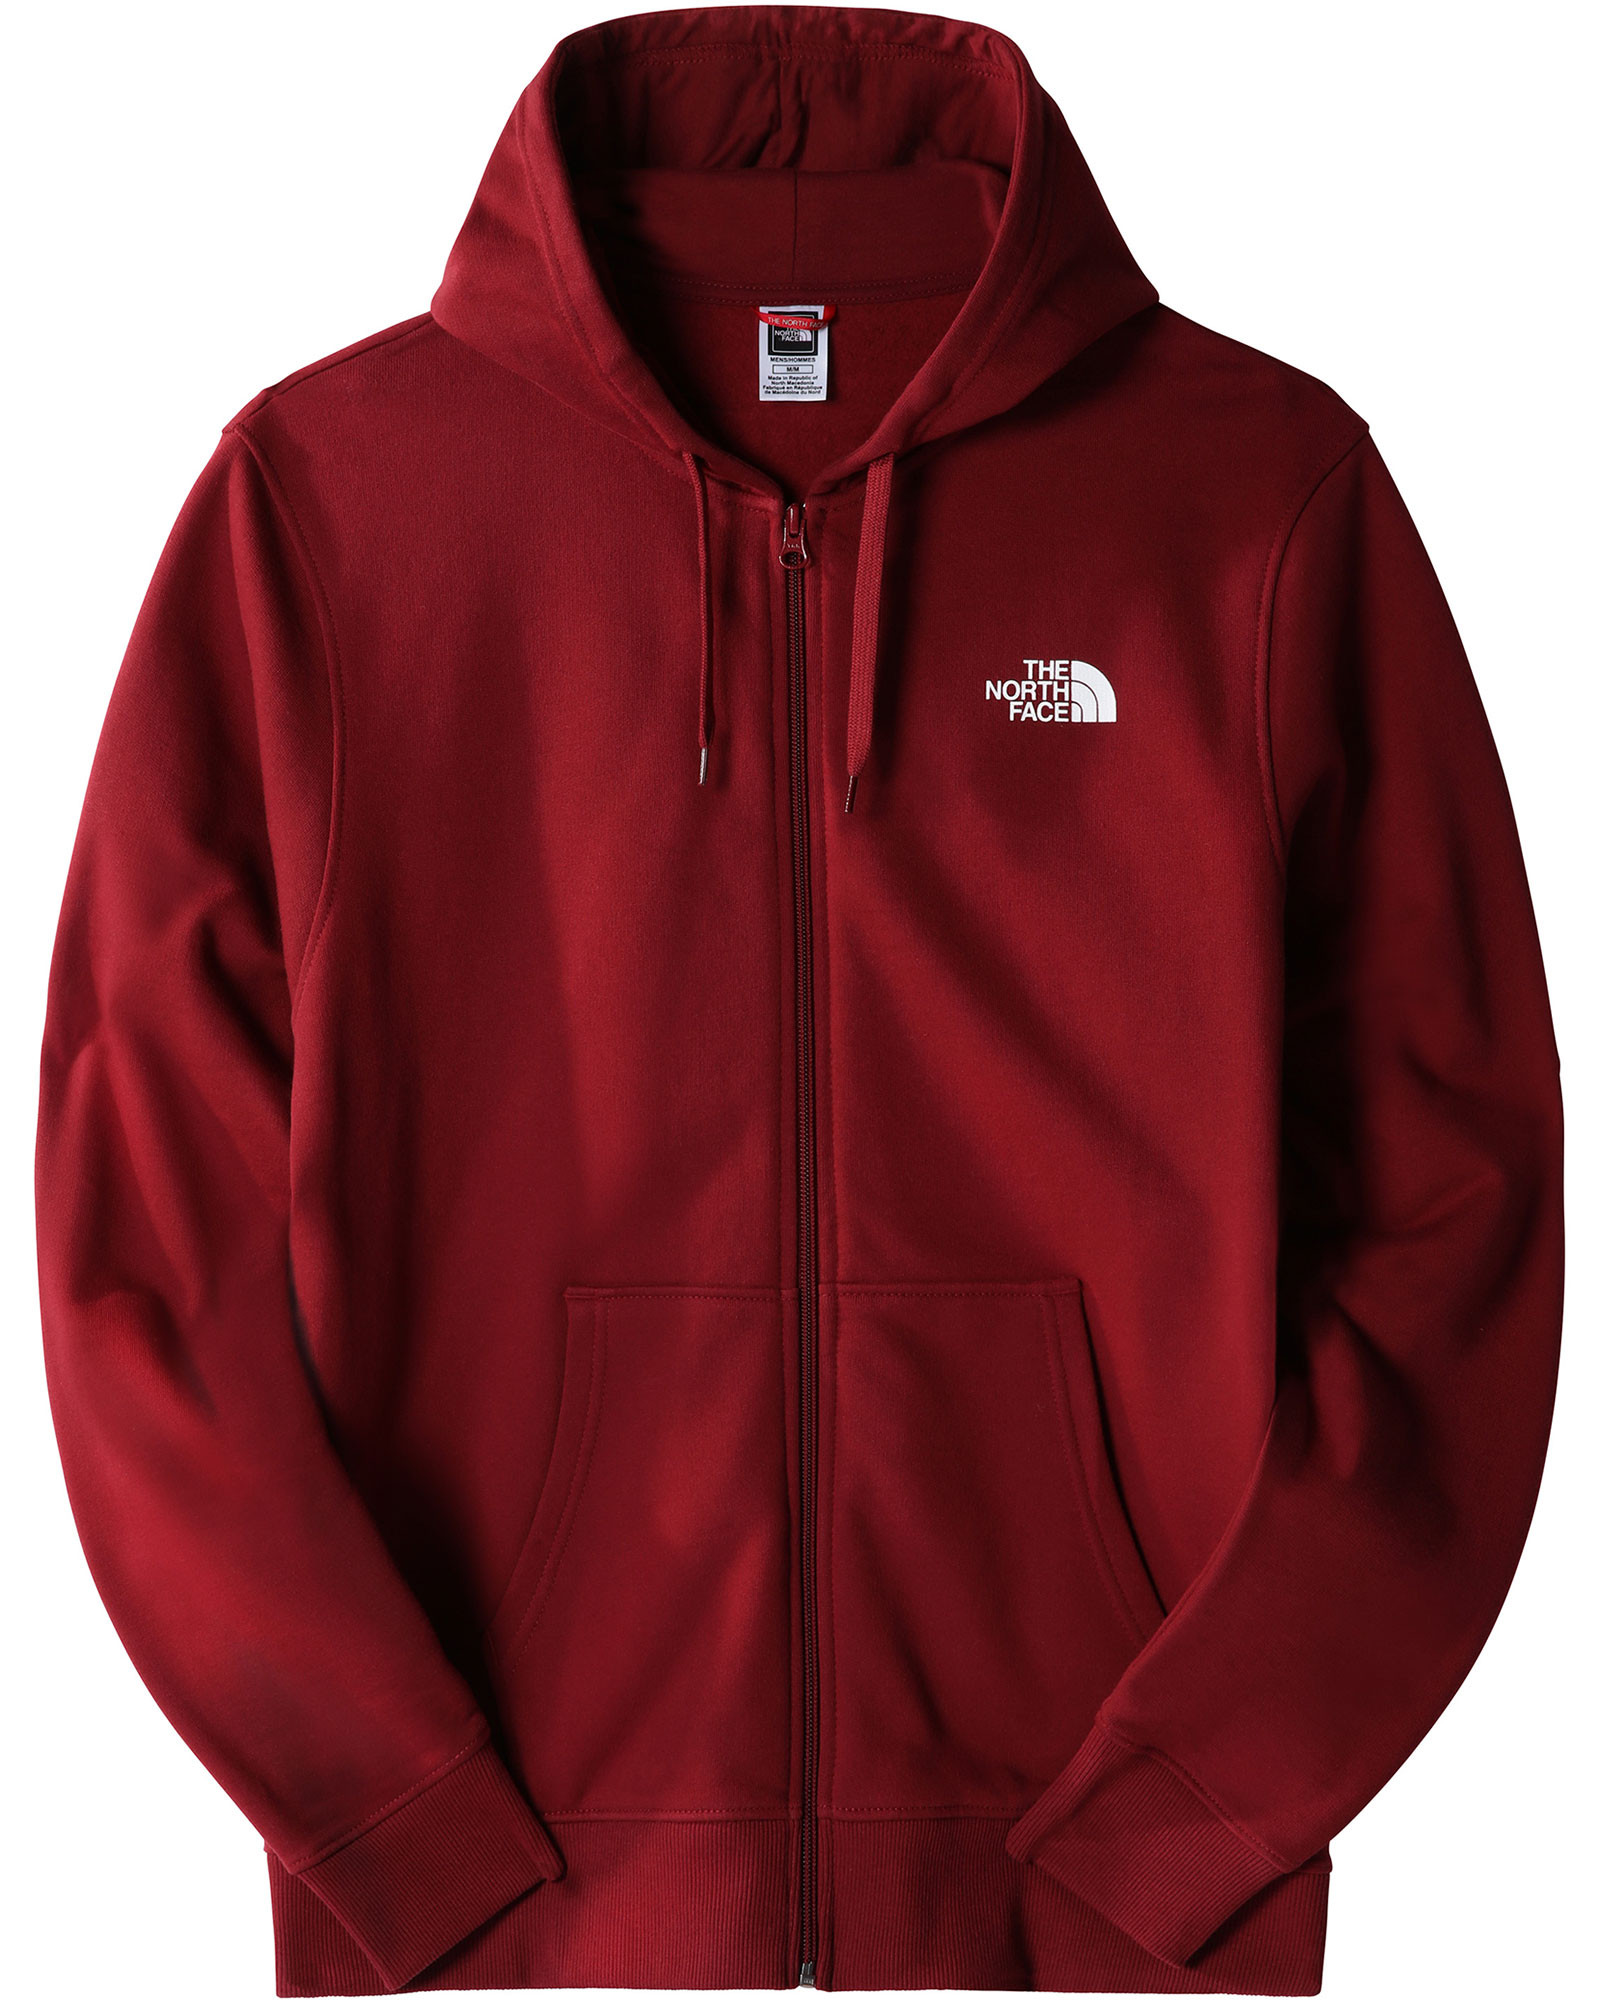 Product image of The North Face Open Gate Men's Full Zip Hoodie